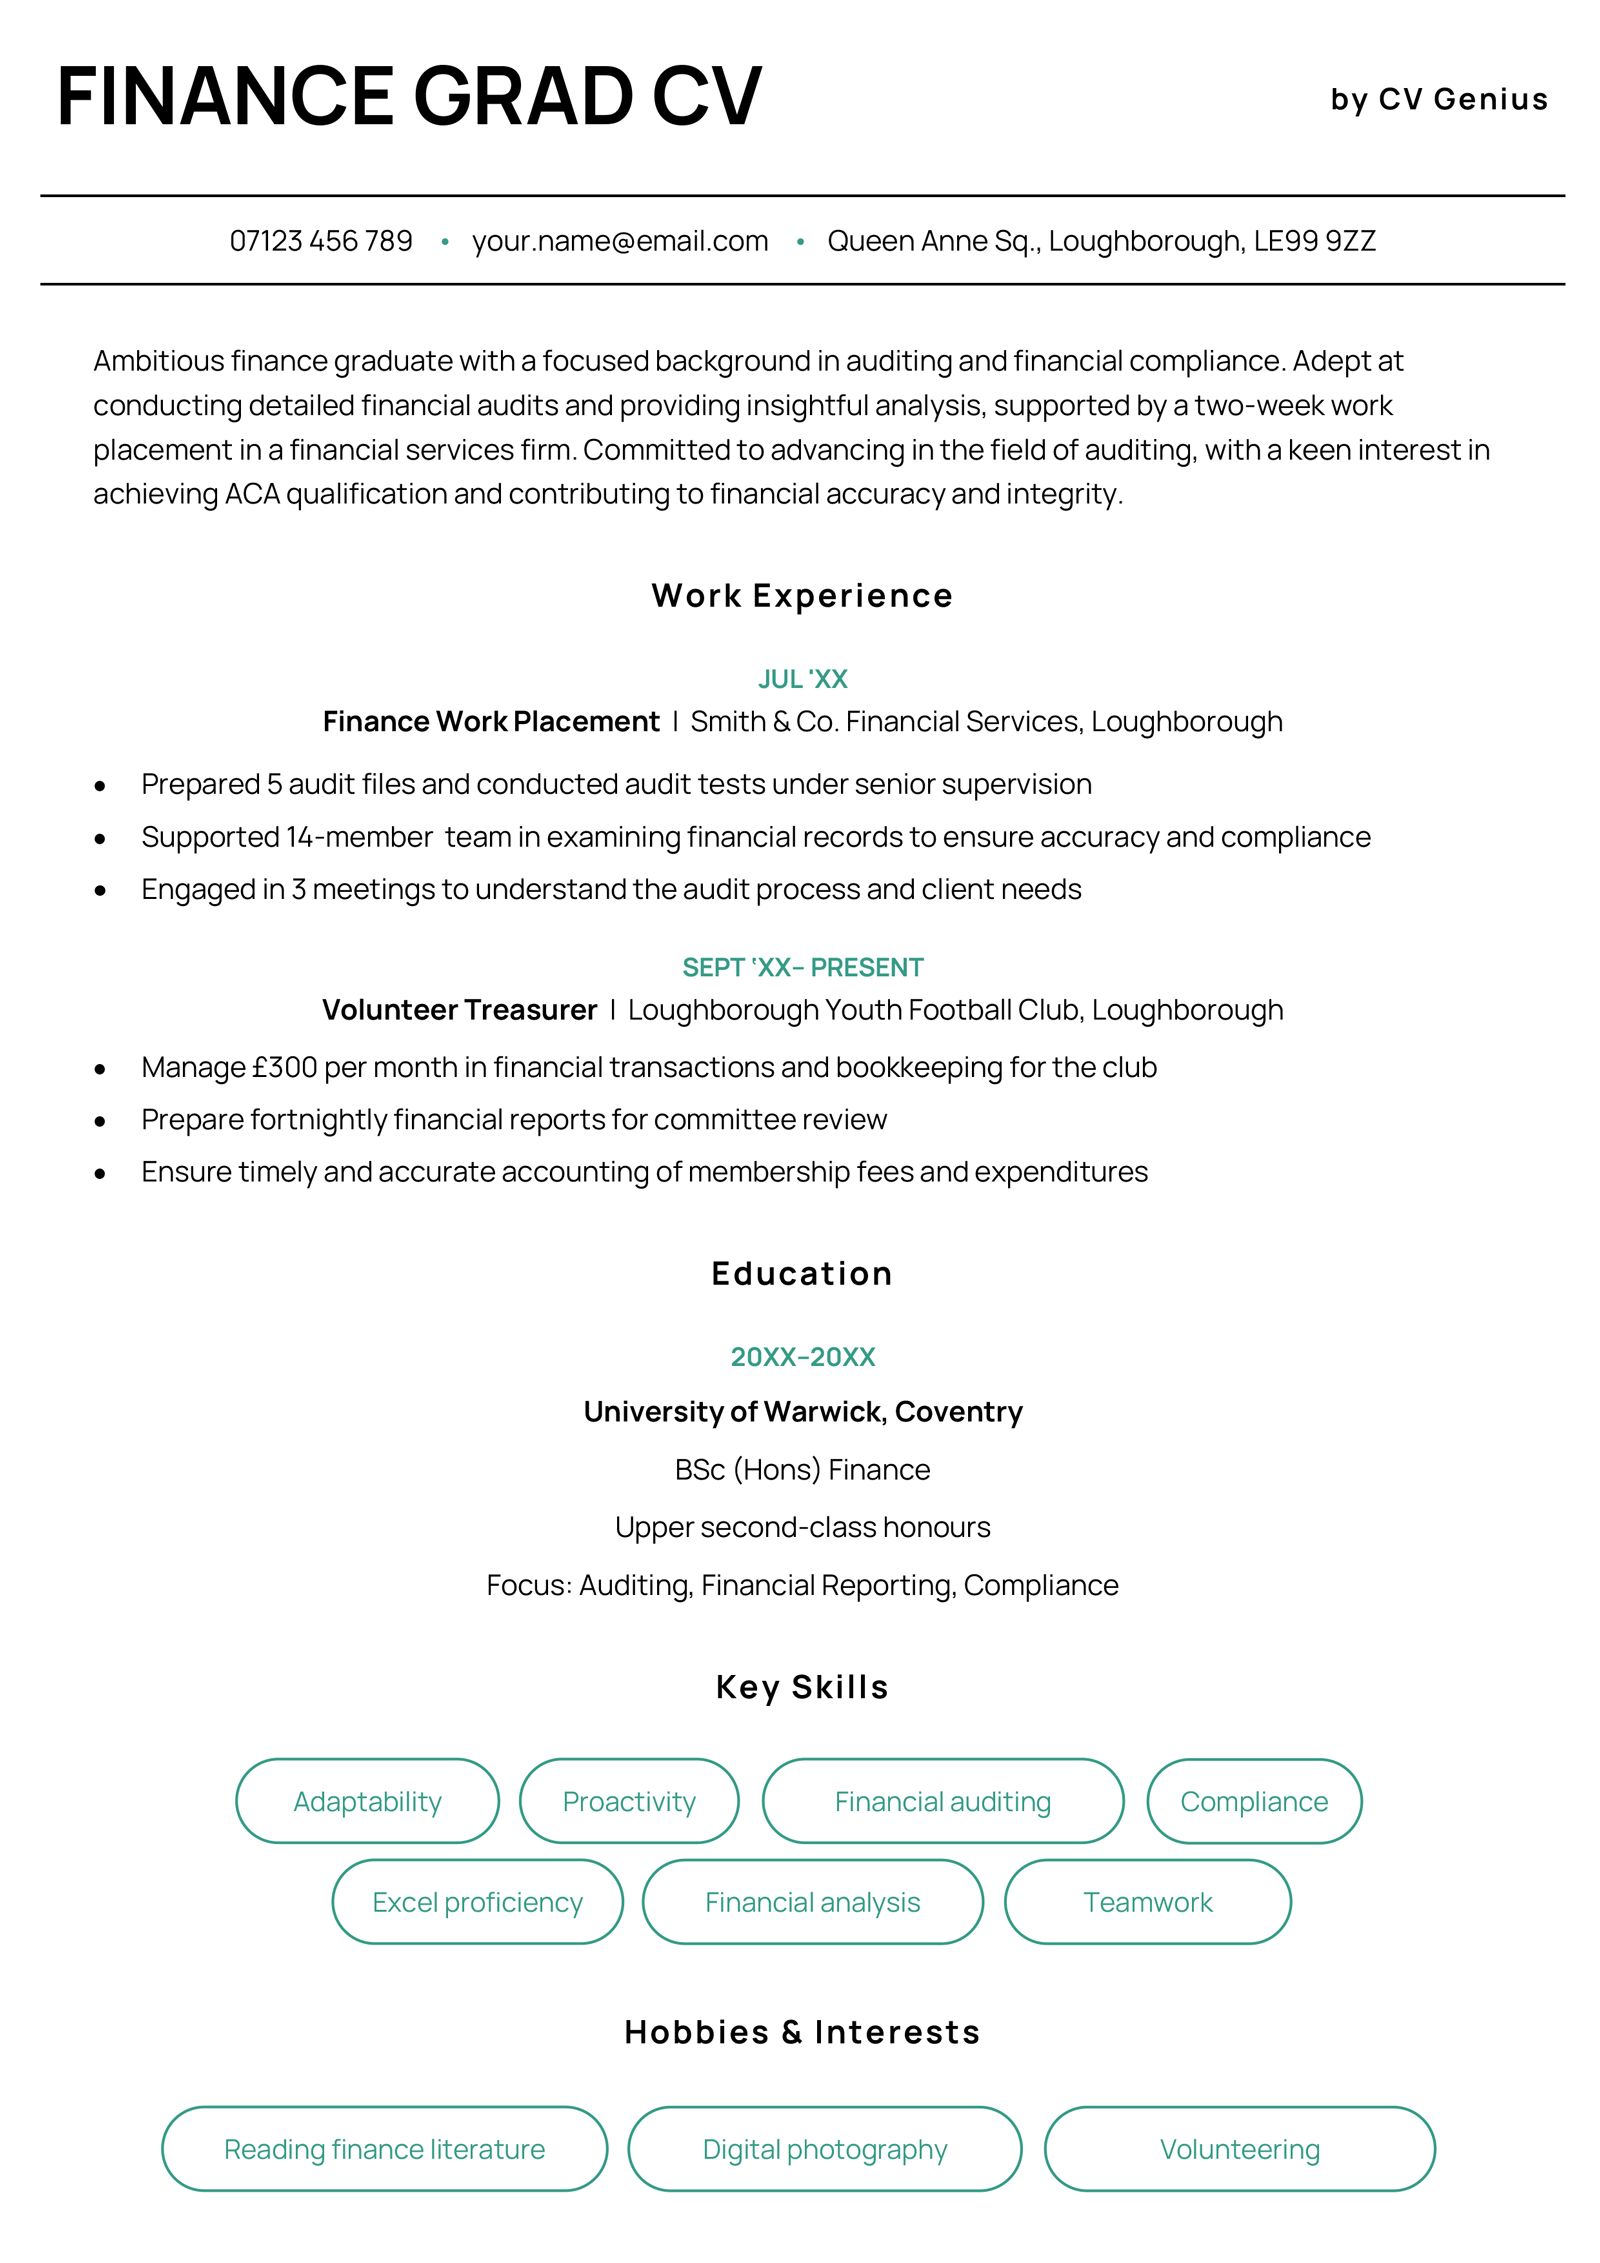 A one-page CV design used for a finance graduate CV example because the applicant lacks a lot of work experience.